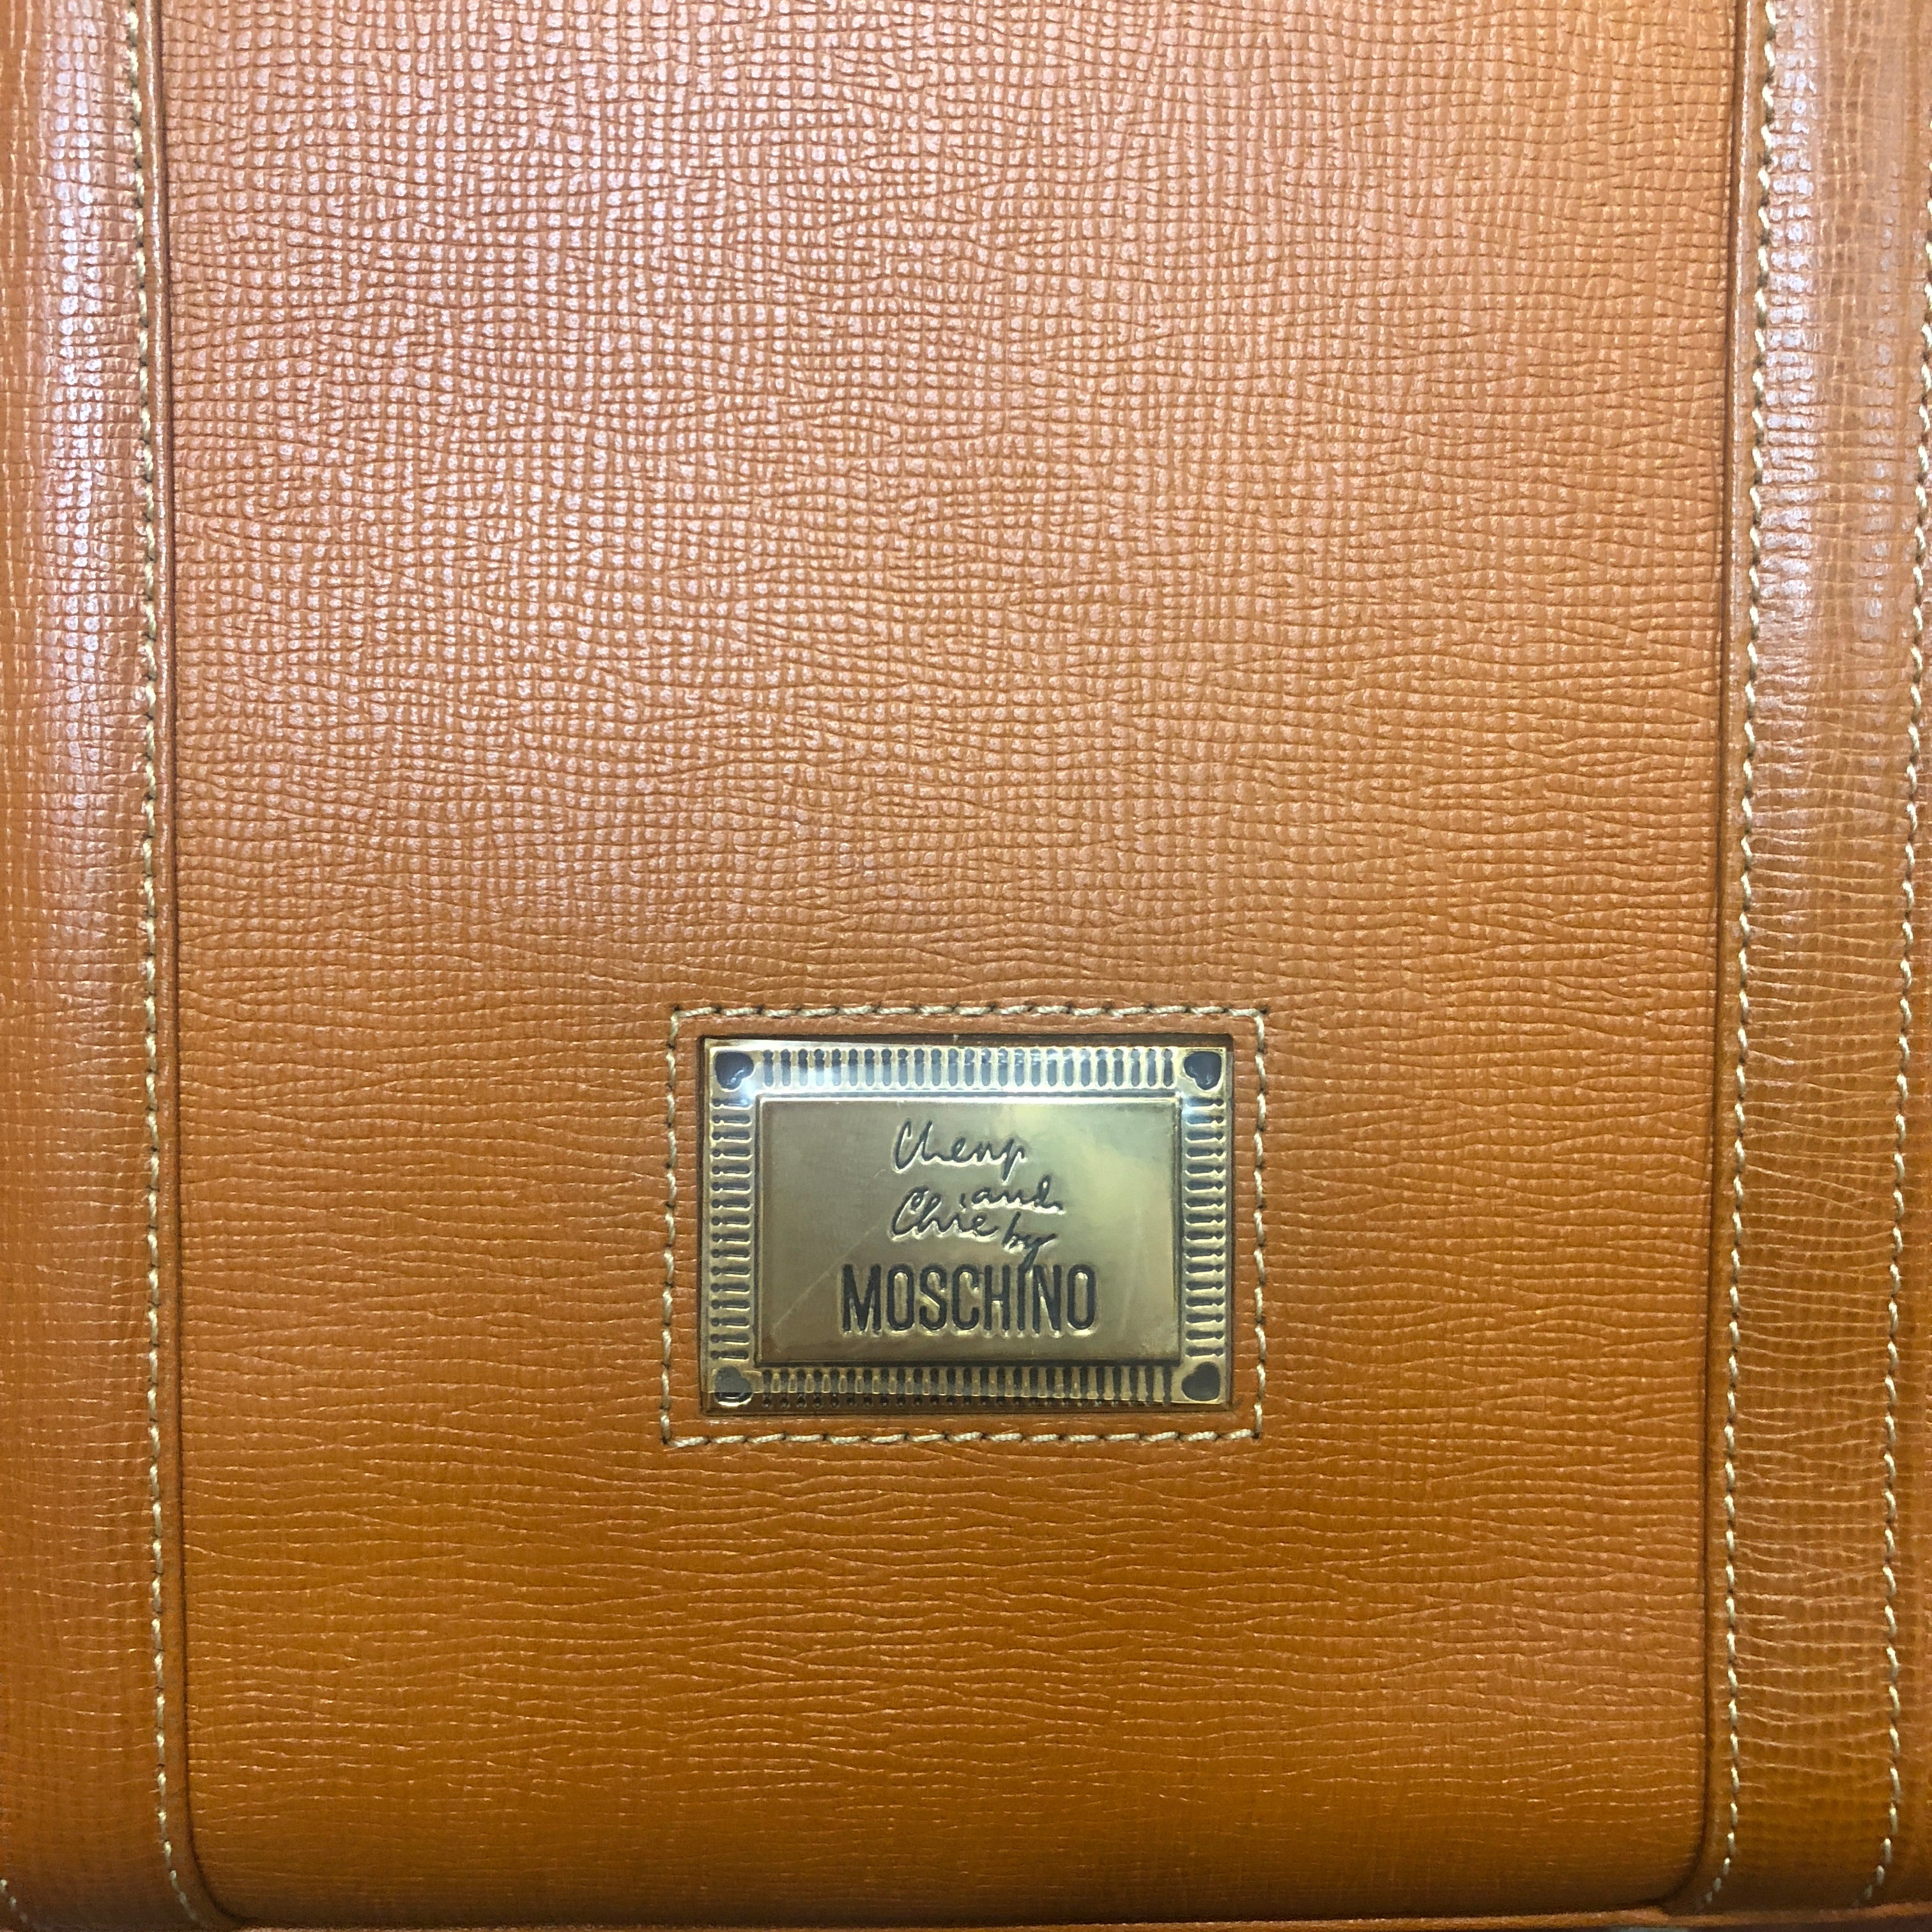 MOSCHINO NEVER USED leather shoulder bag